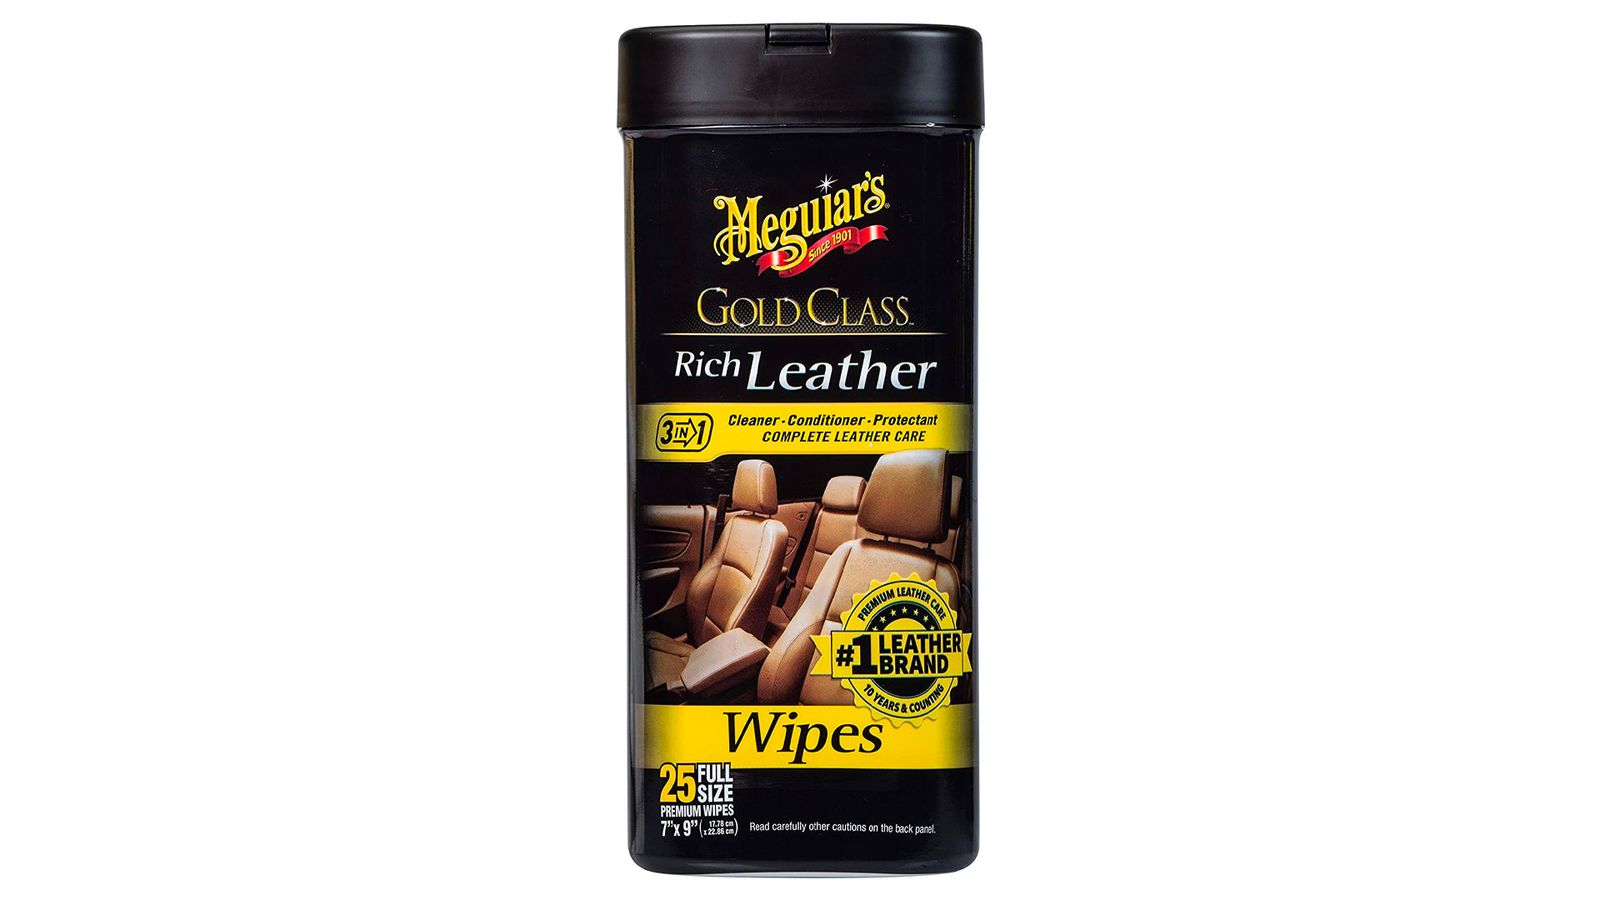 Meguiar's Gold Class Wipes product image of a black and yellow wipe container.